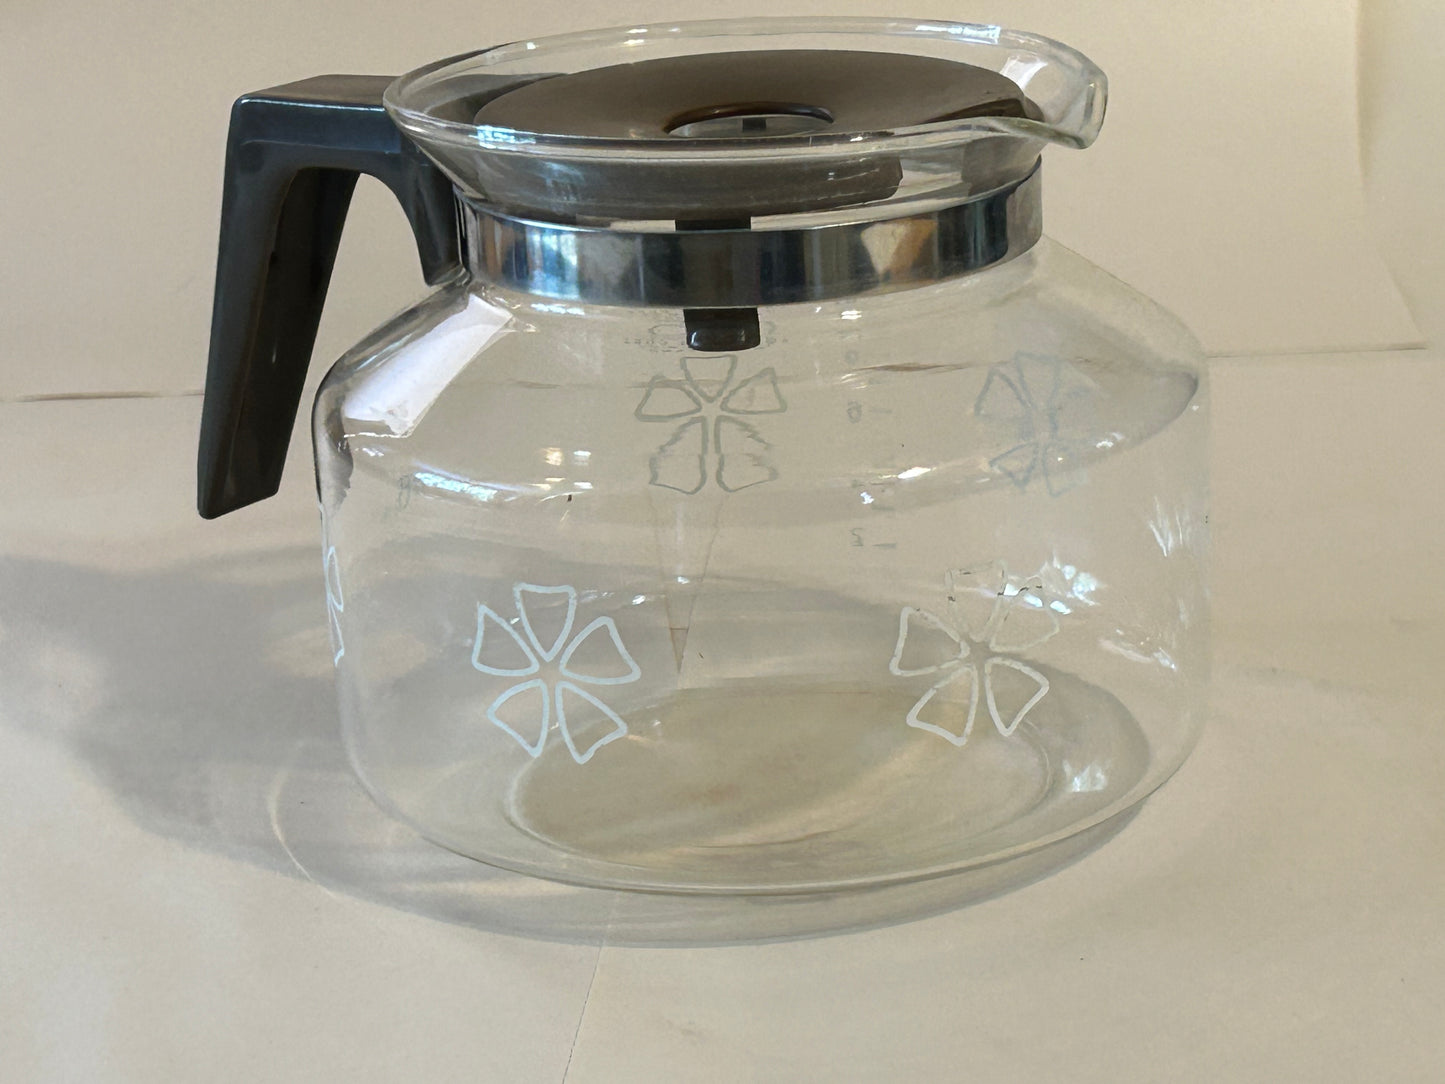 Vintage 1980s Mr. Coffee Replacement Coffee Pot